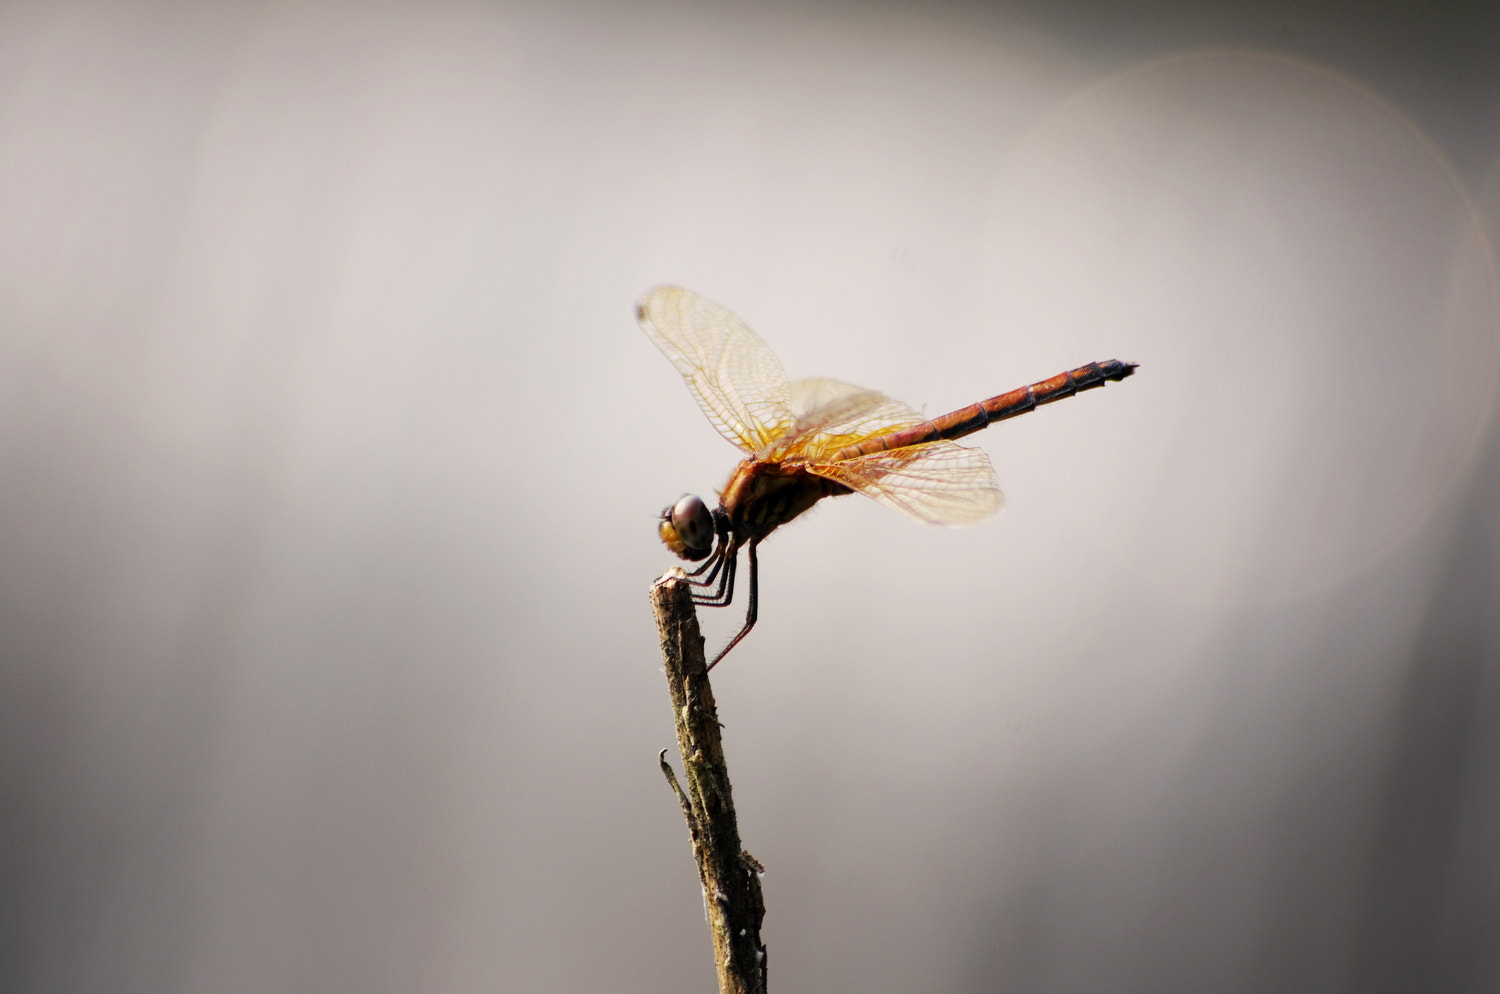 Pentax K-5 sample photo. A dragonfly photography